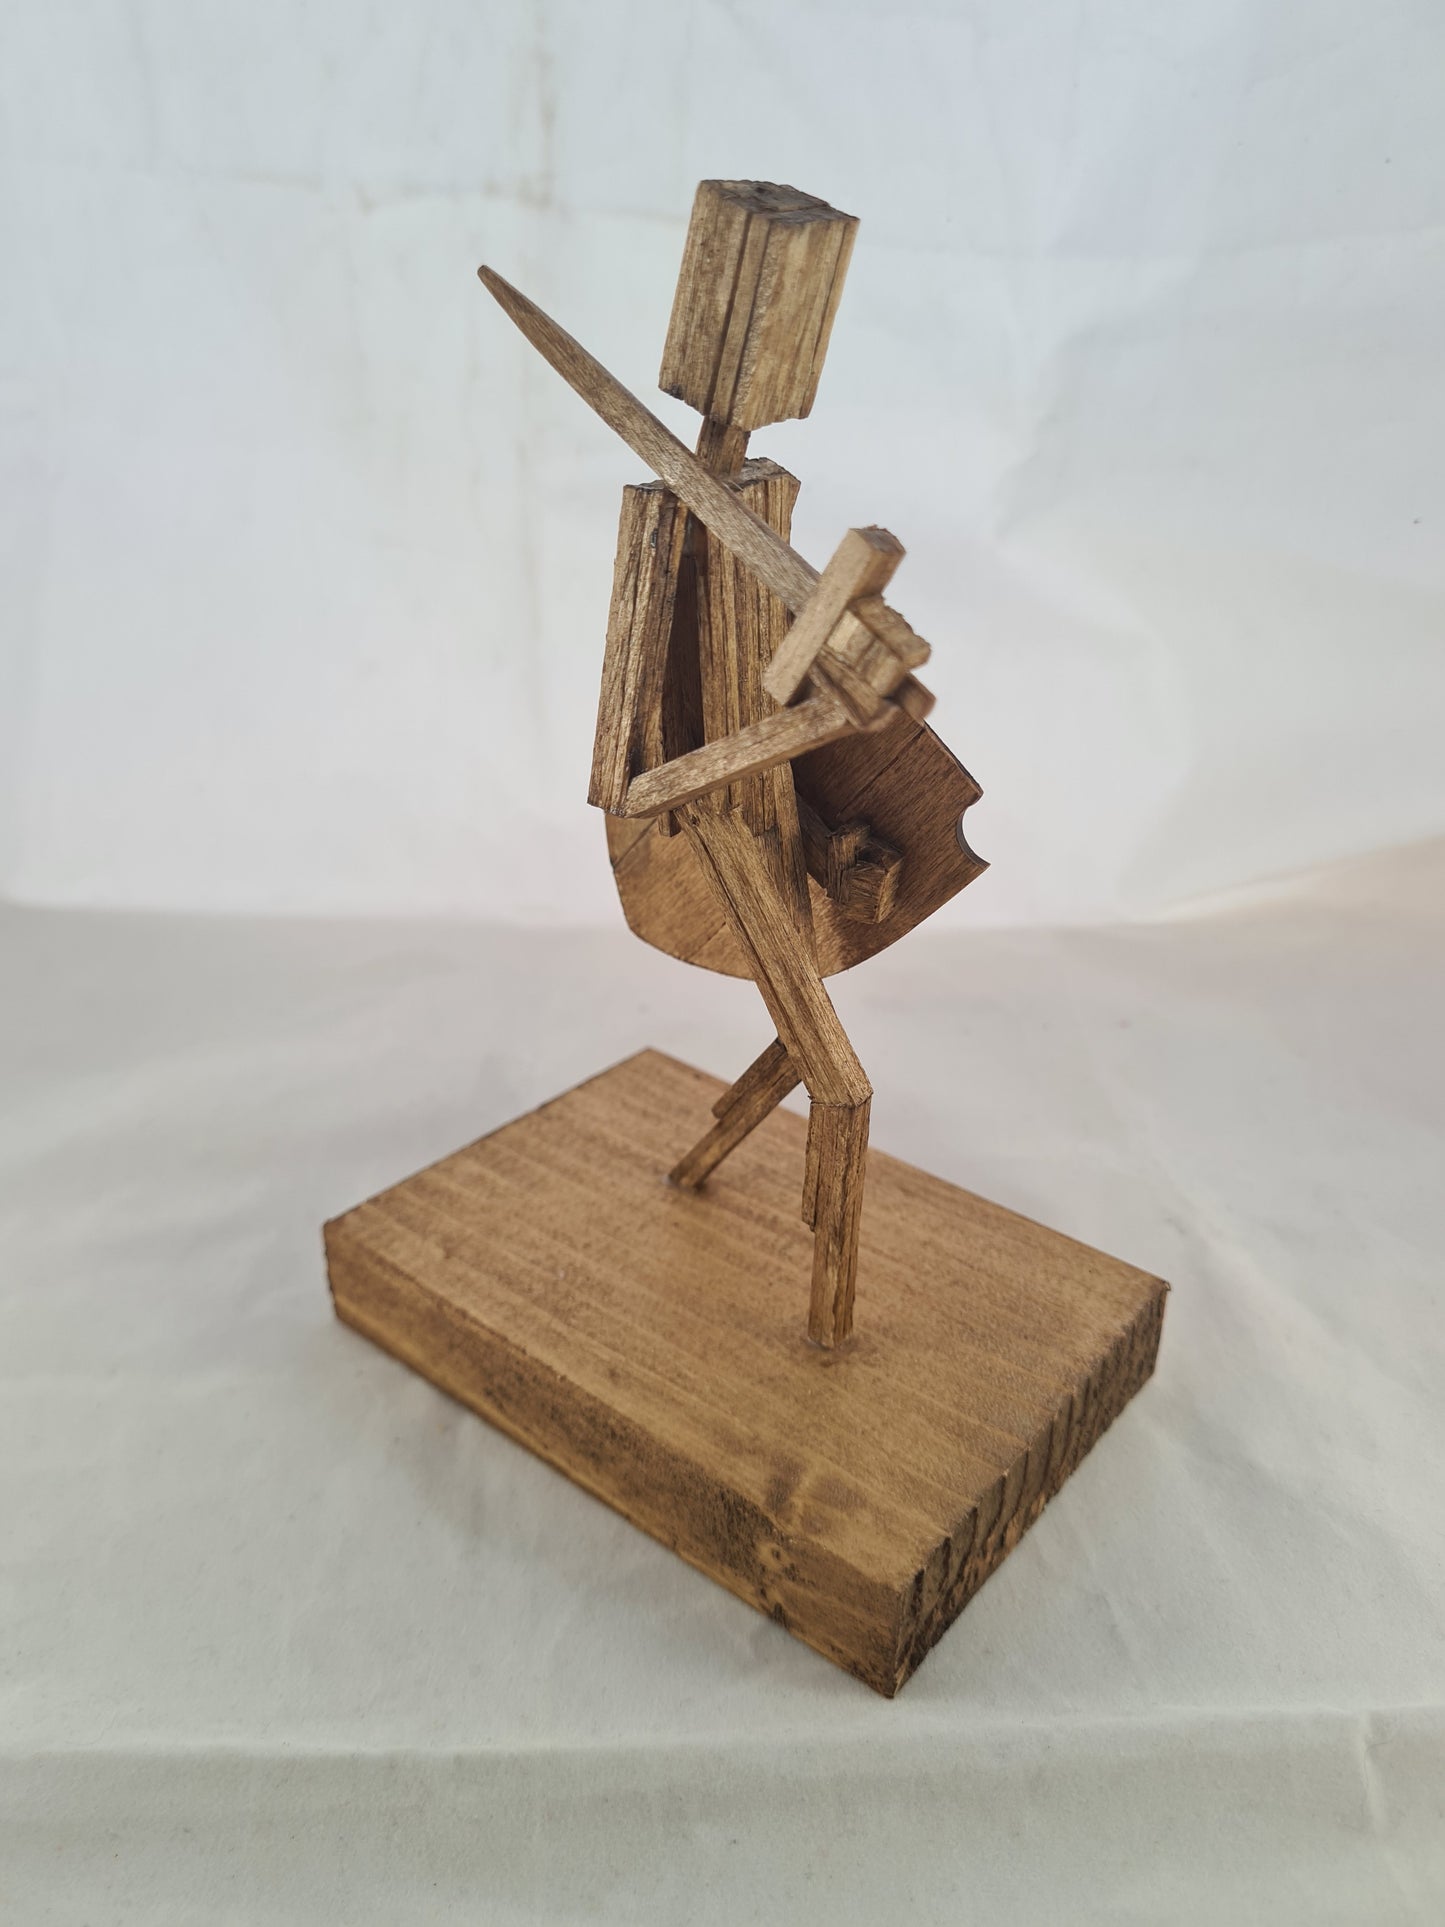 Battle warn - Handcrafted Wooden Matchstick Figures - Gifts, Ornaments and Decor By Tiggidy Designs